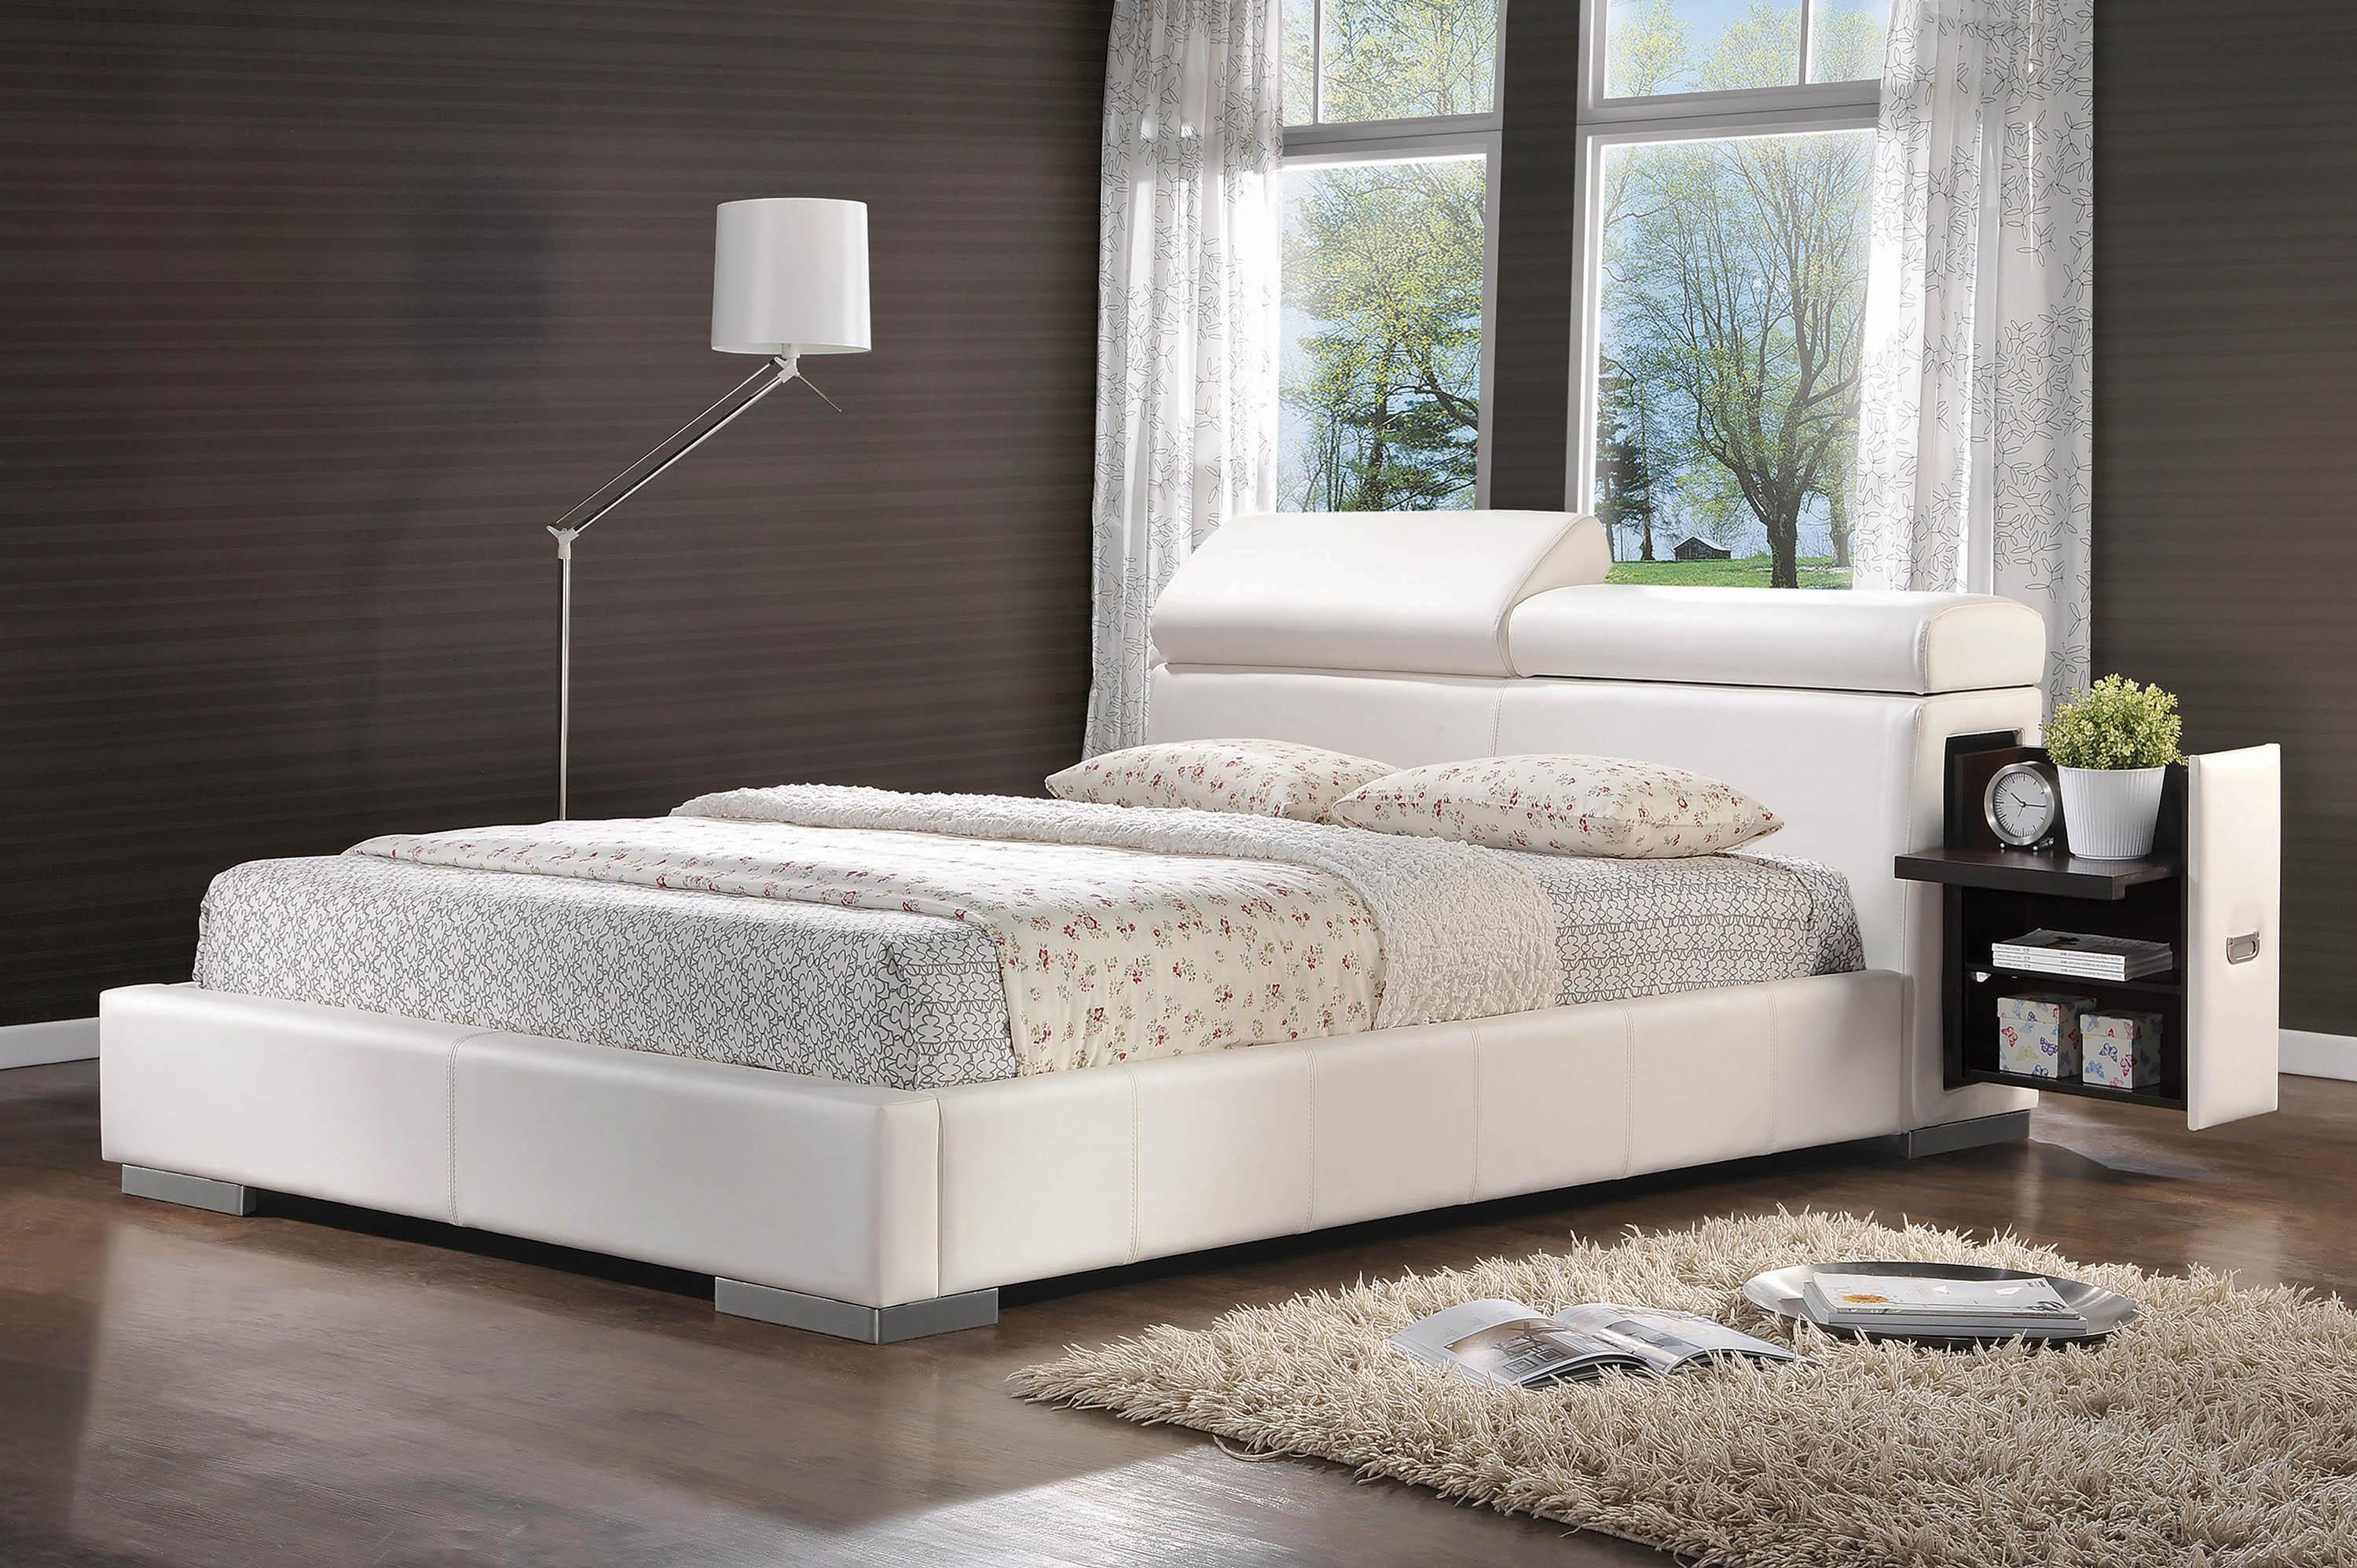 

    
Contemporary White Leather Upholstery E king bed Maxine by Coaster
